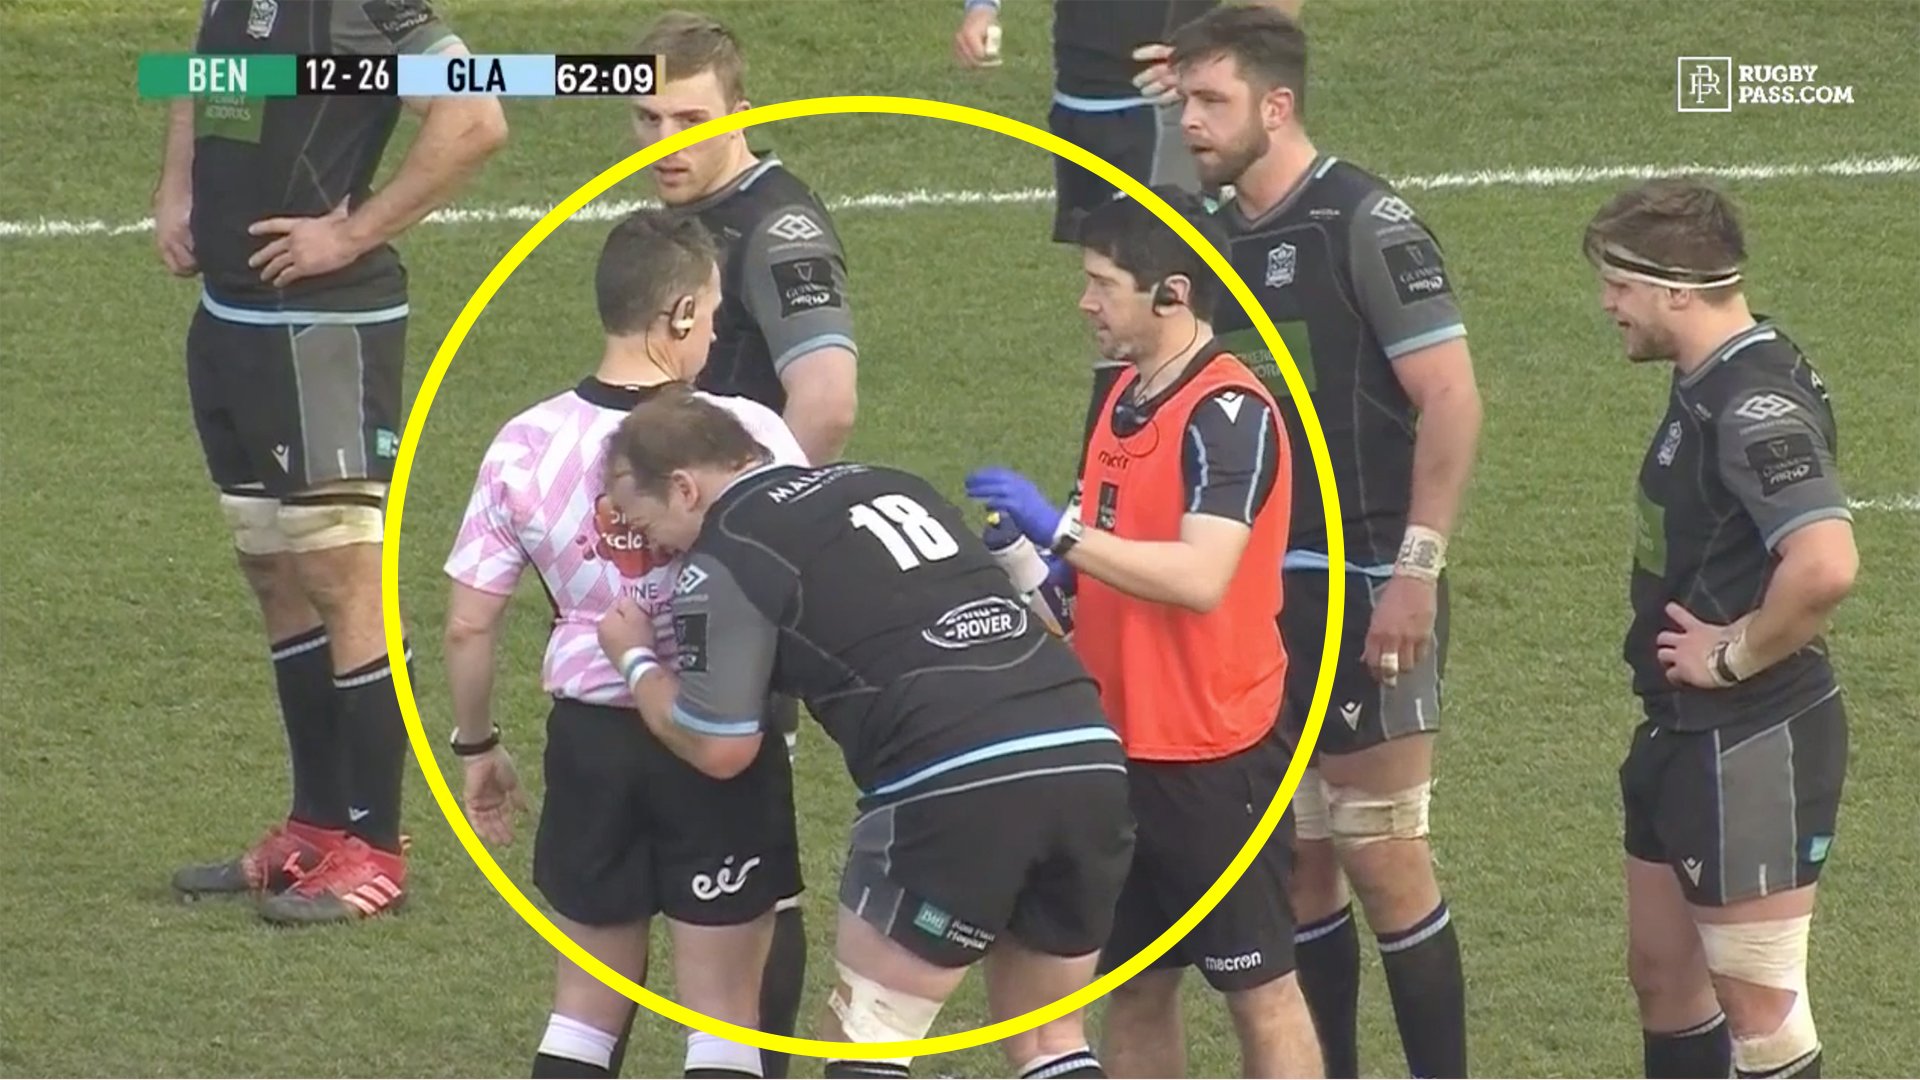 This simple act of kindness from Nigel Owens is amazing rugby fans around the World